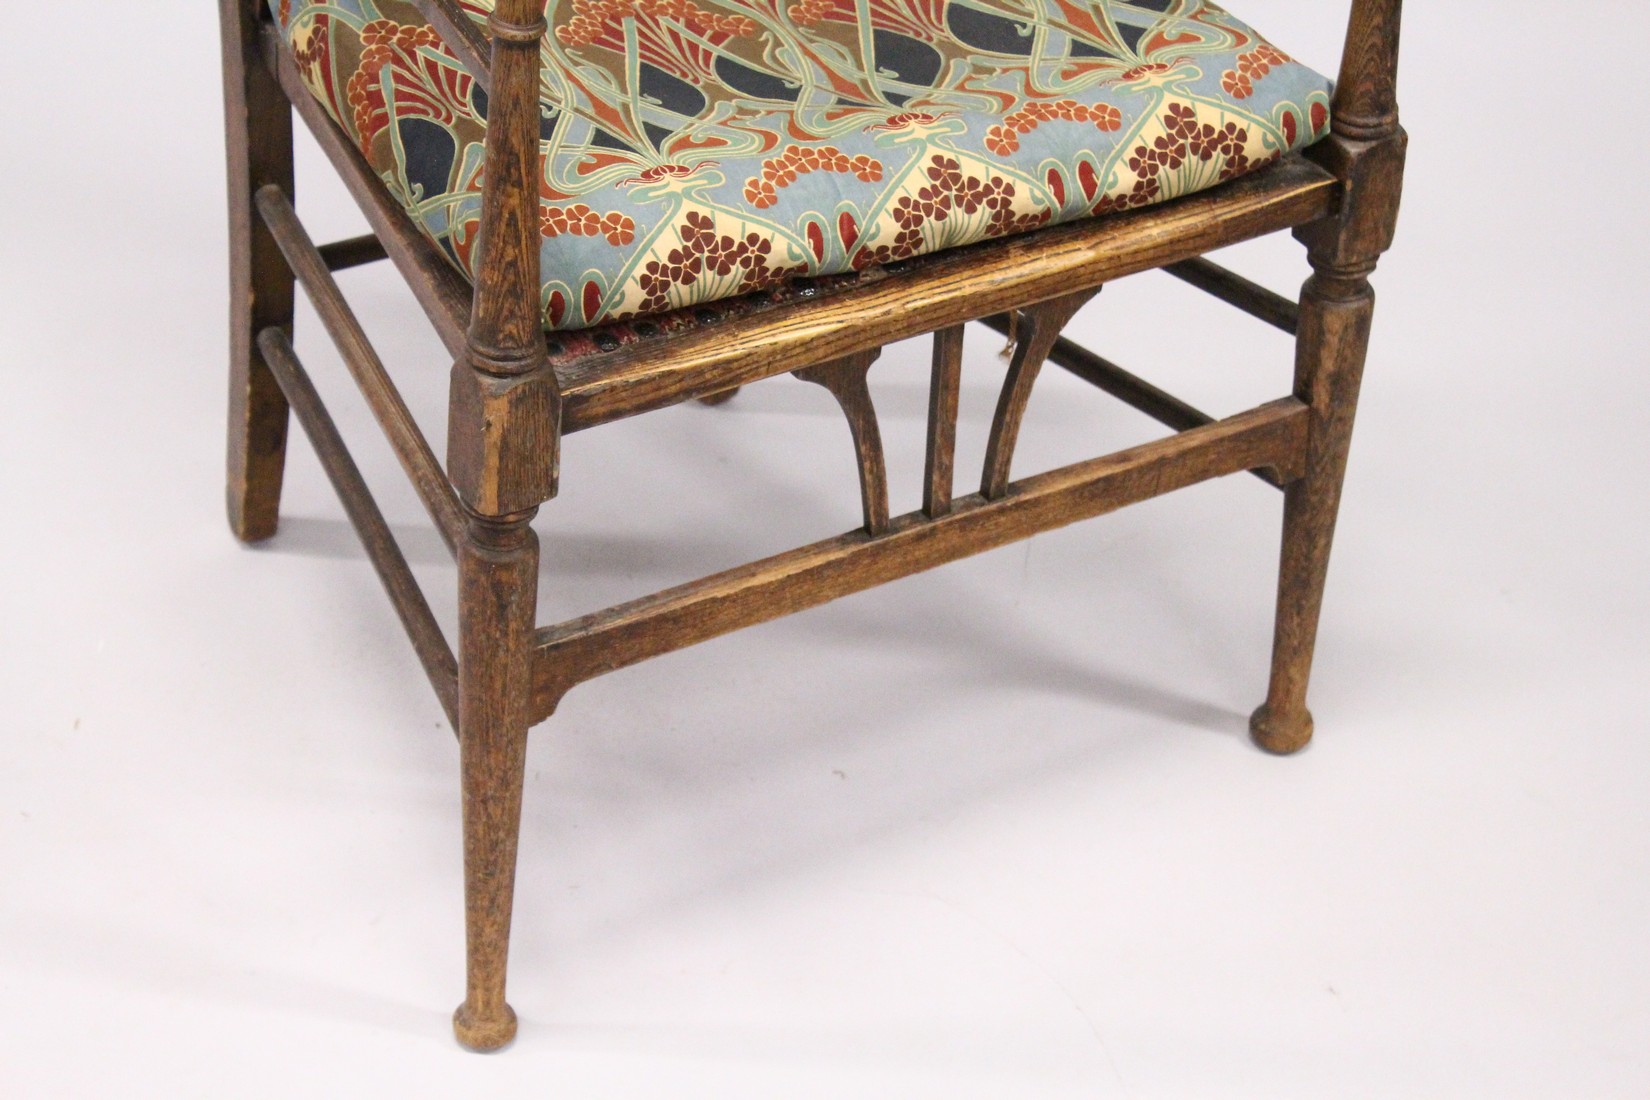 A GOOD LIBERTY RUSTIC ARM CHAIR with Liberty print padded back and seat. - Image 2 of 16